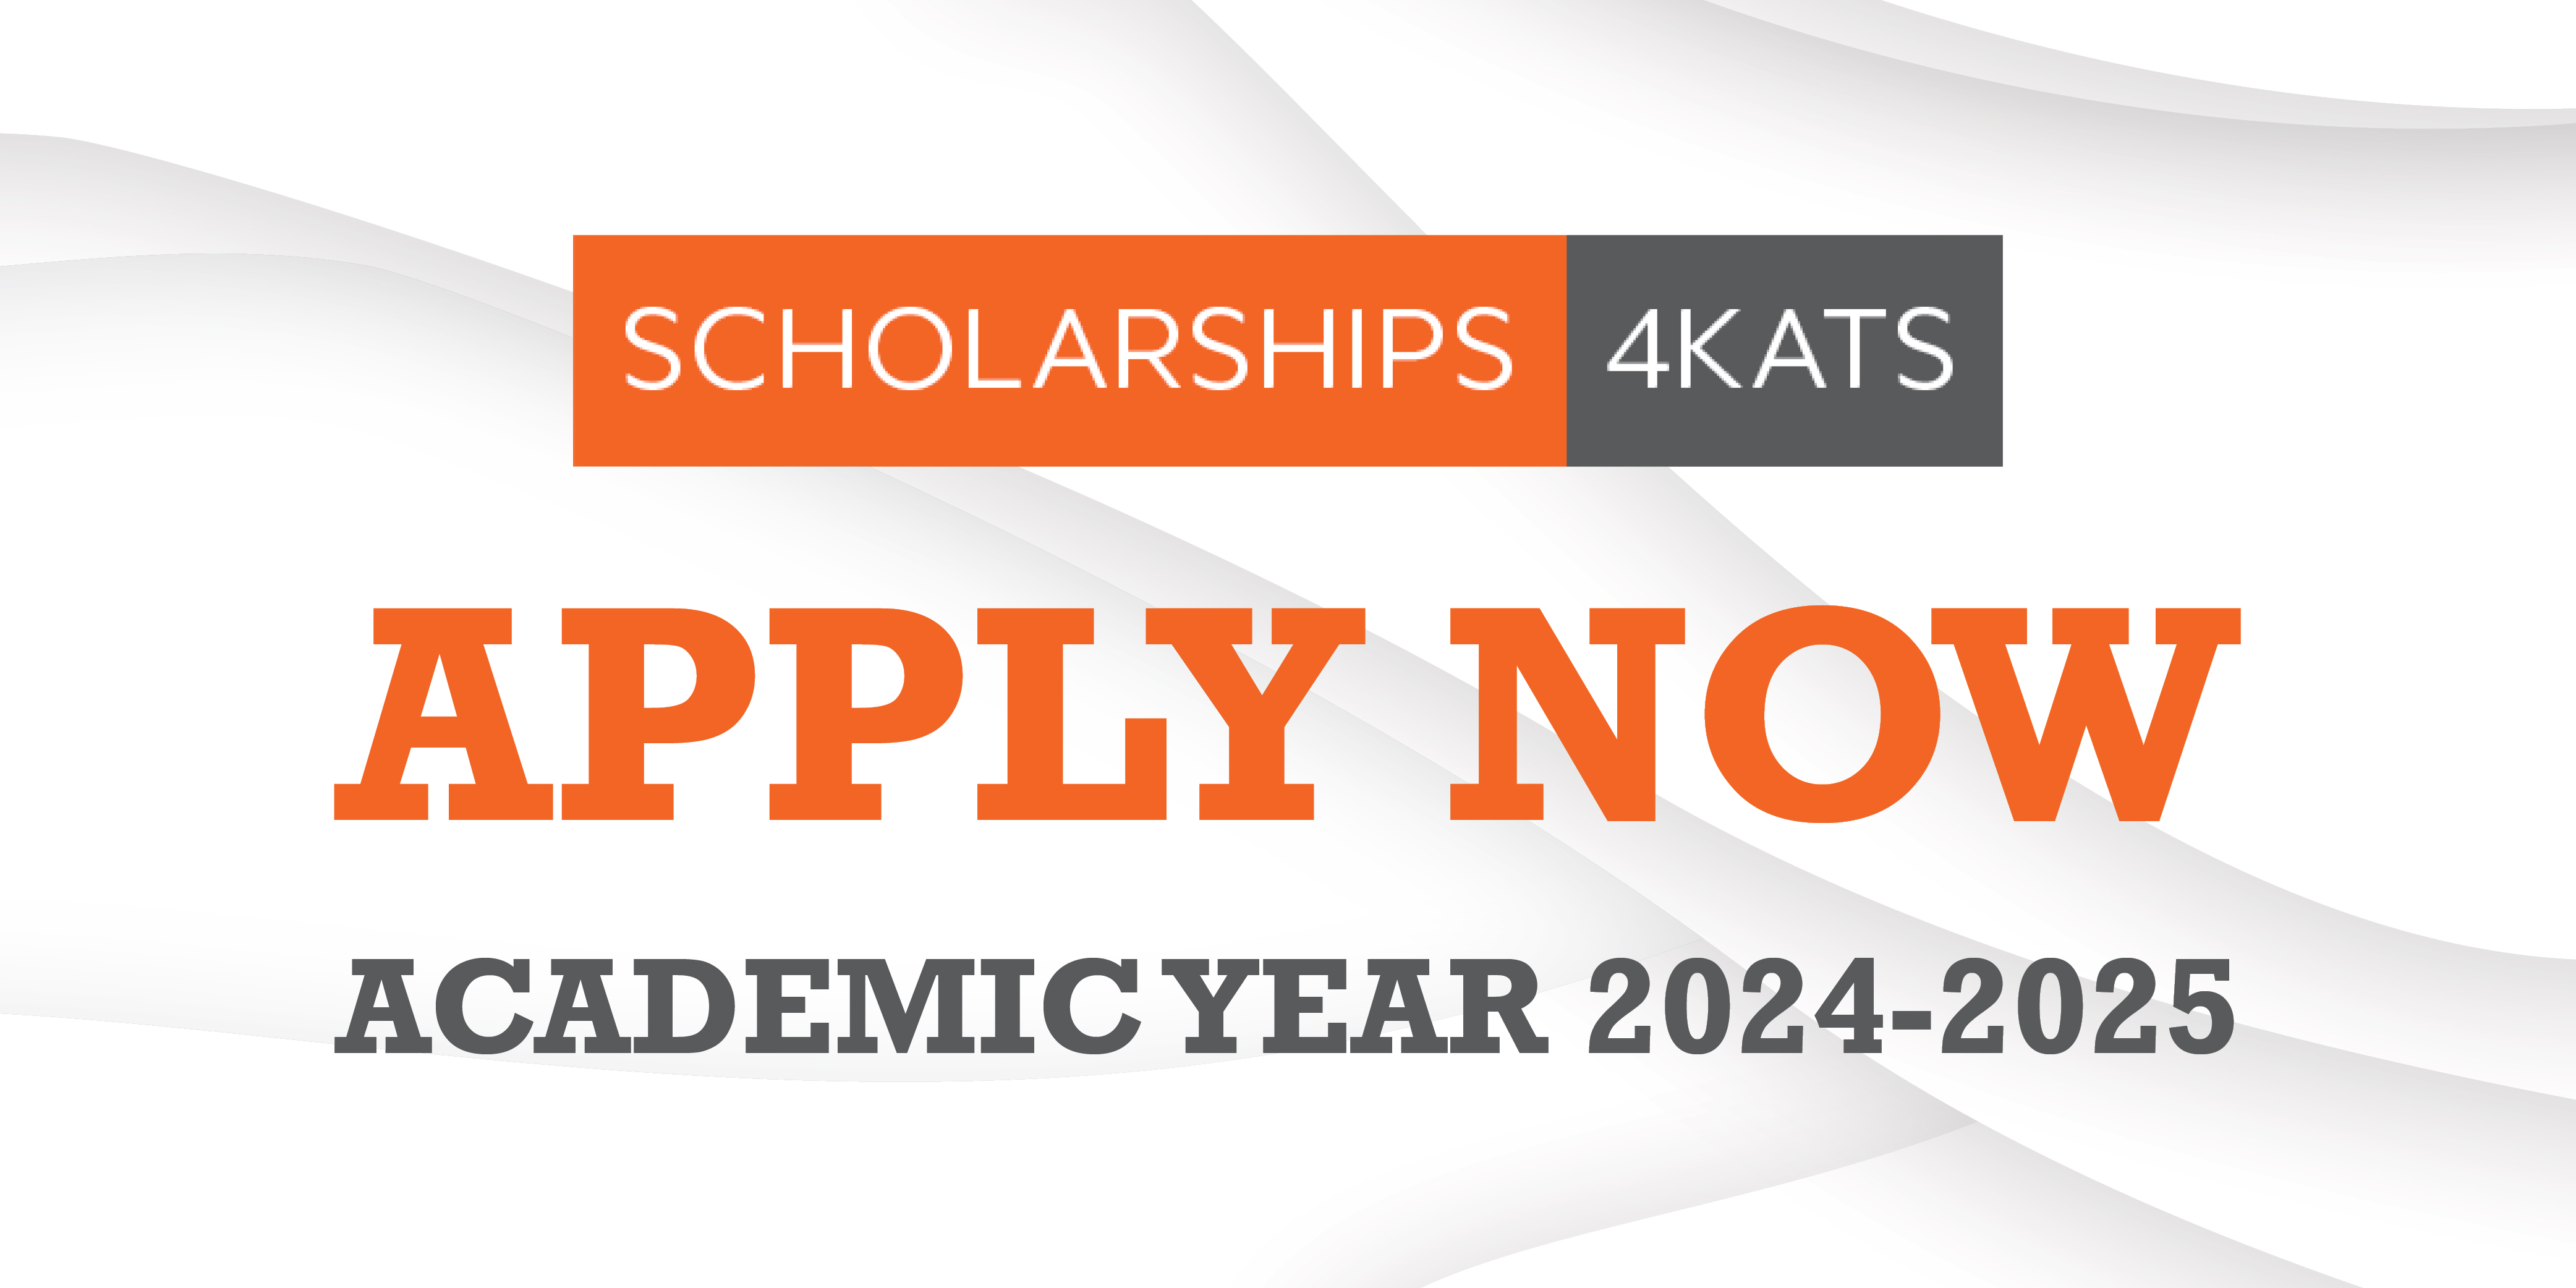 Scholarships for Kats is now open for academic year 2024 to 2025